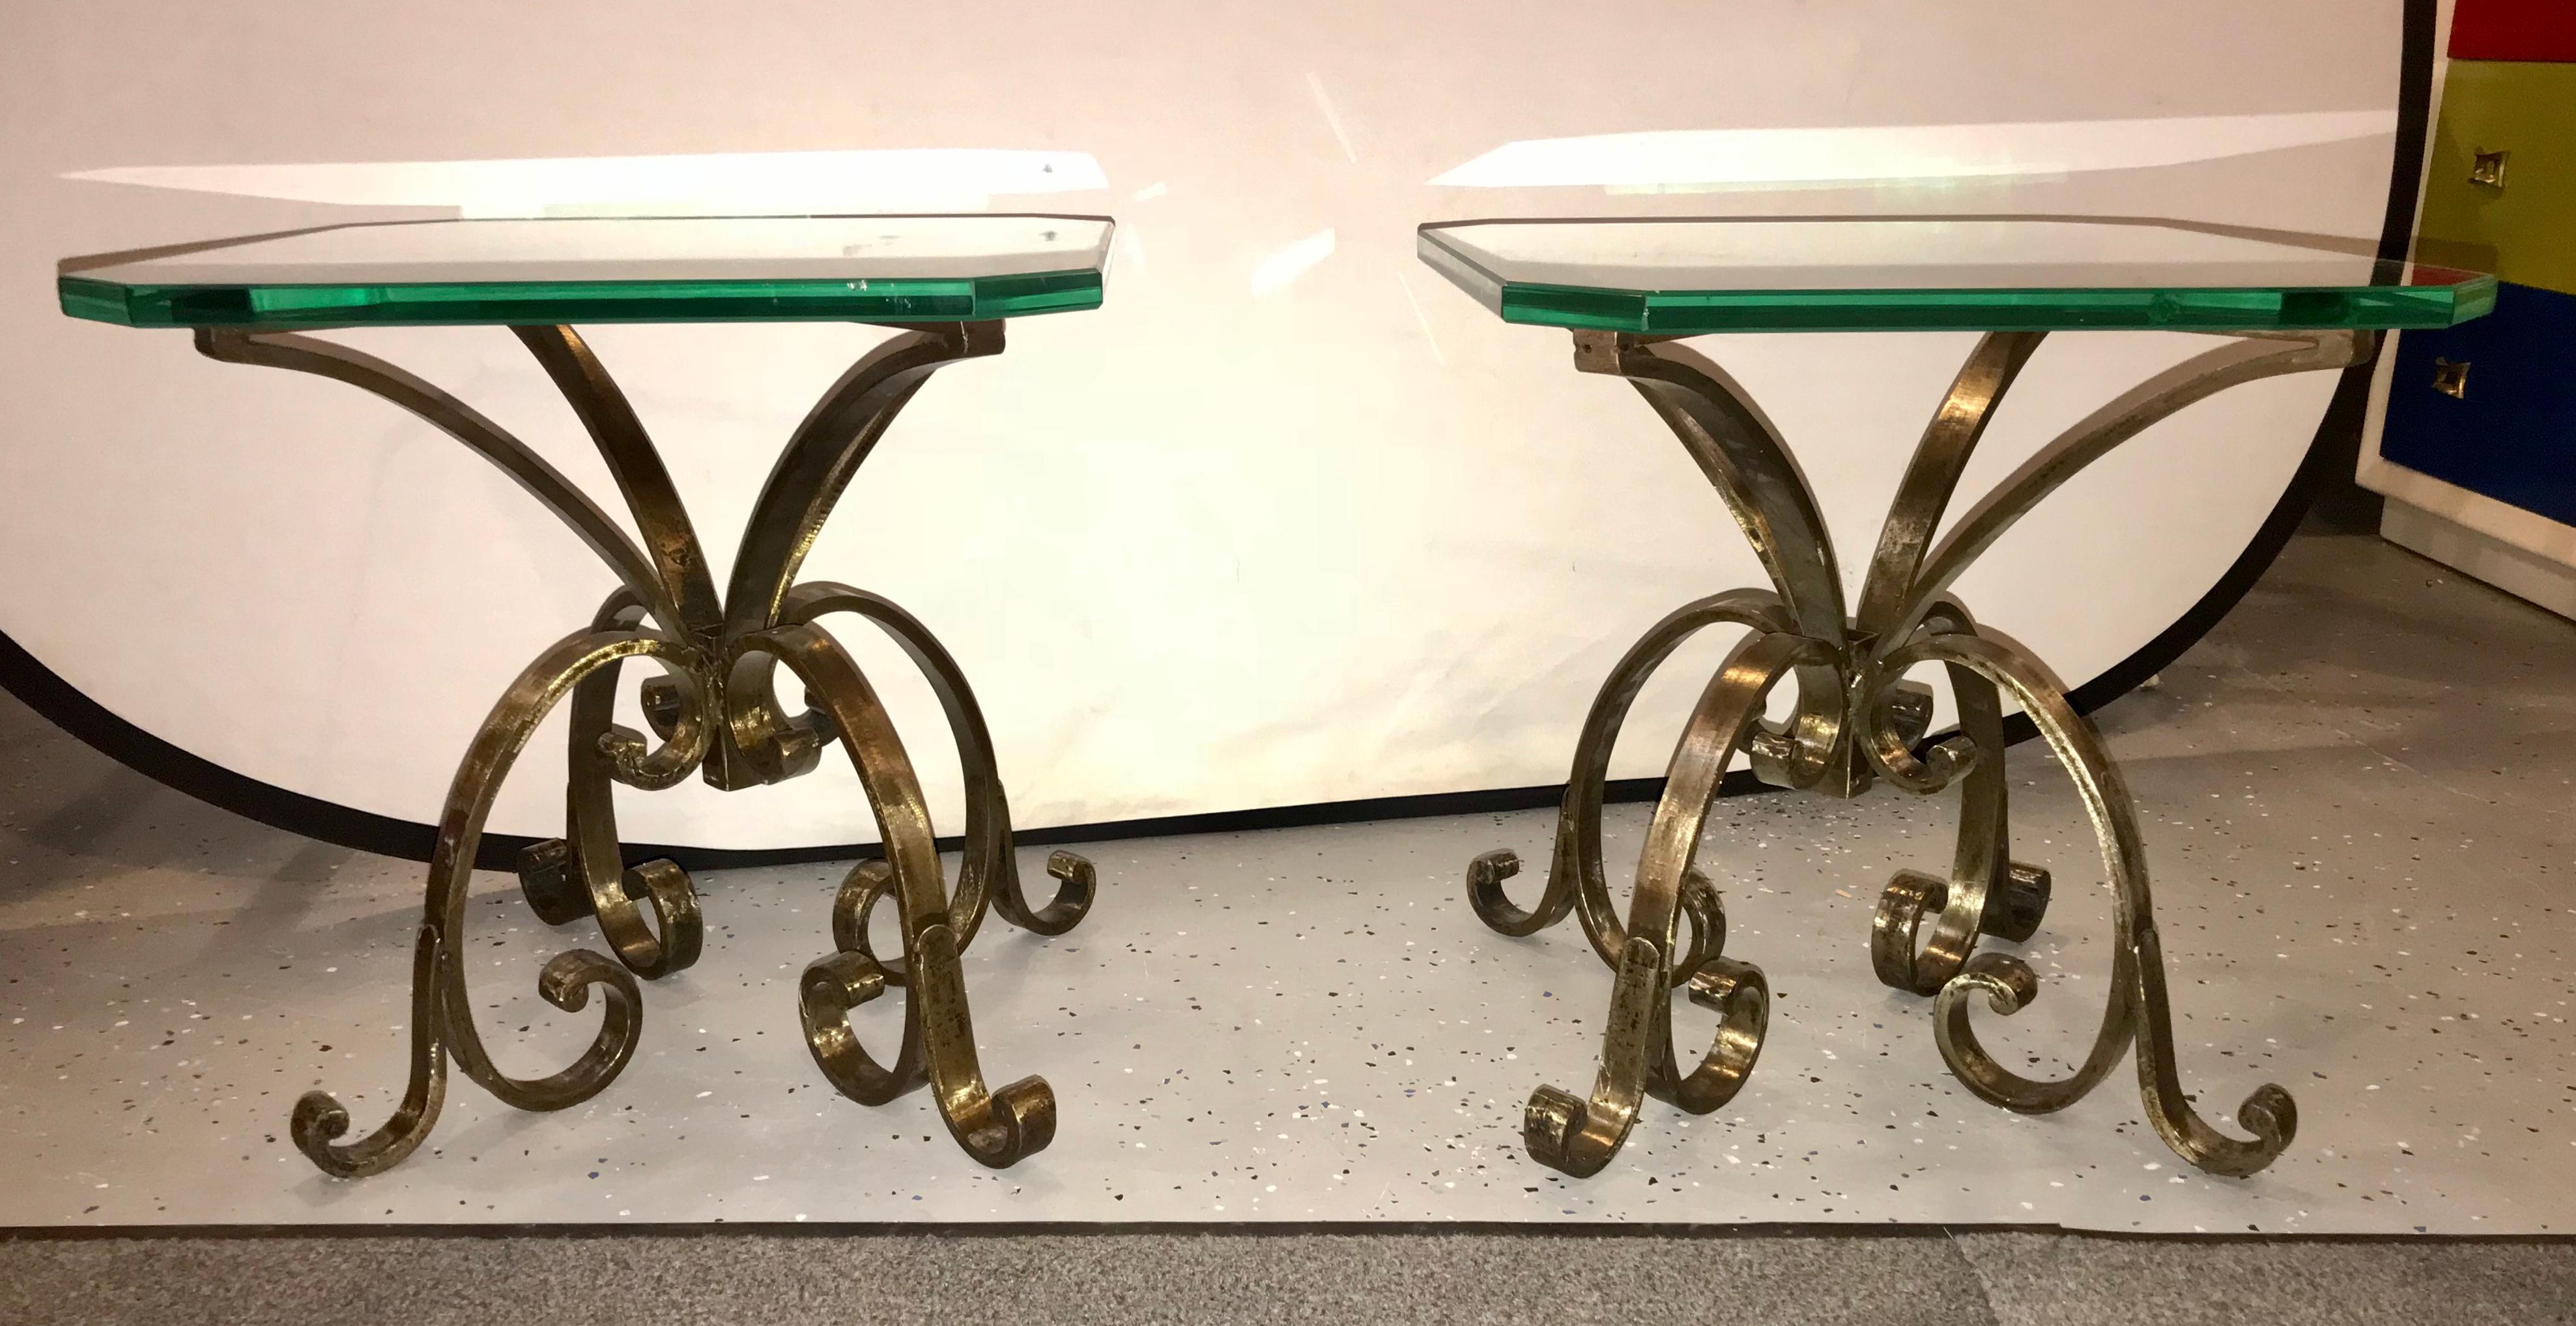 A pair of welded steel end or pedestal tables having 3/4 inches tops glass. Each handcrafted end or pedestal table is crafted in a hand hammered manner with swirls and scroll designs. Placing these 18 inch tables together would make a beautiful